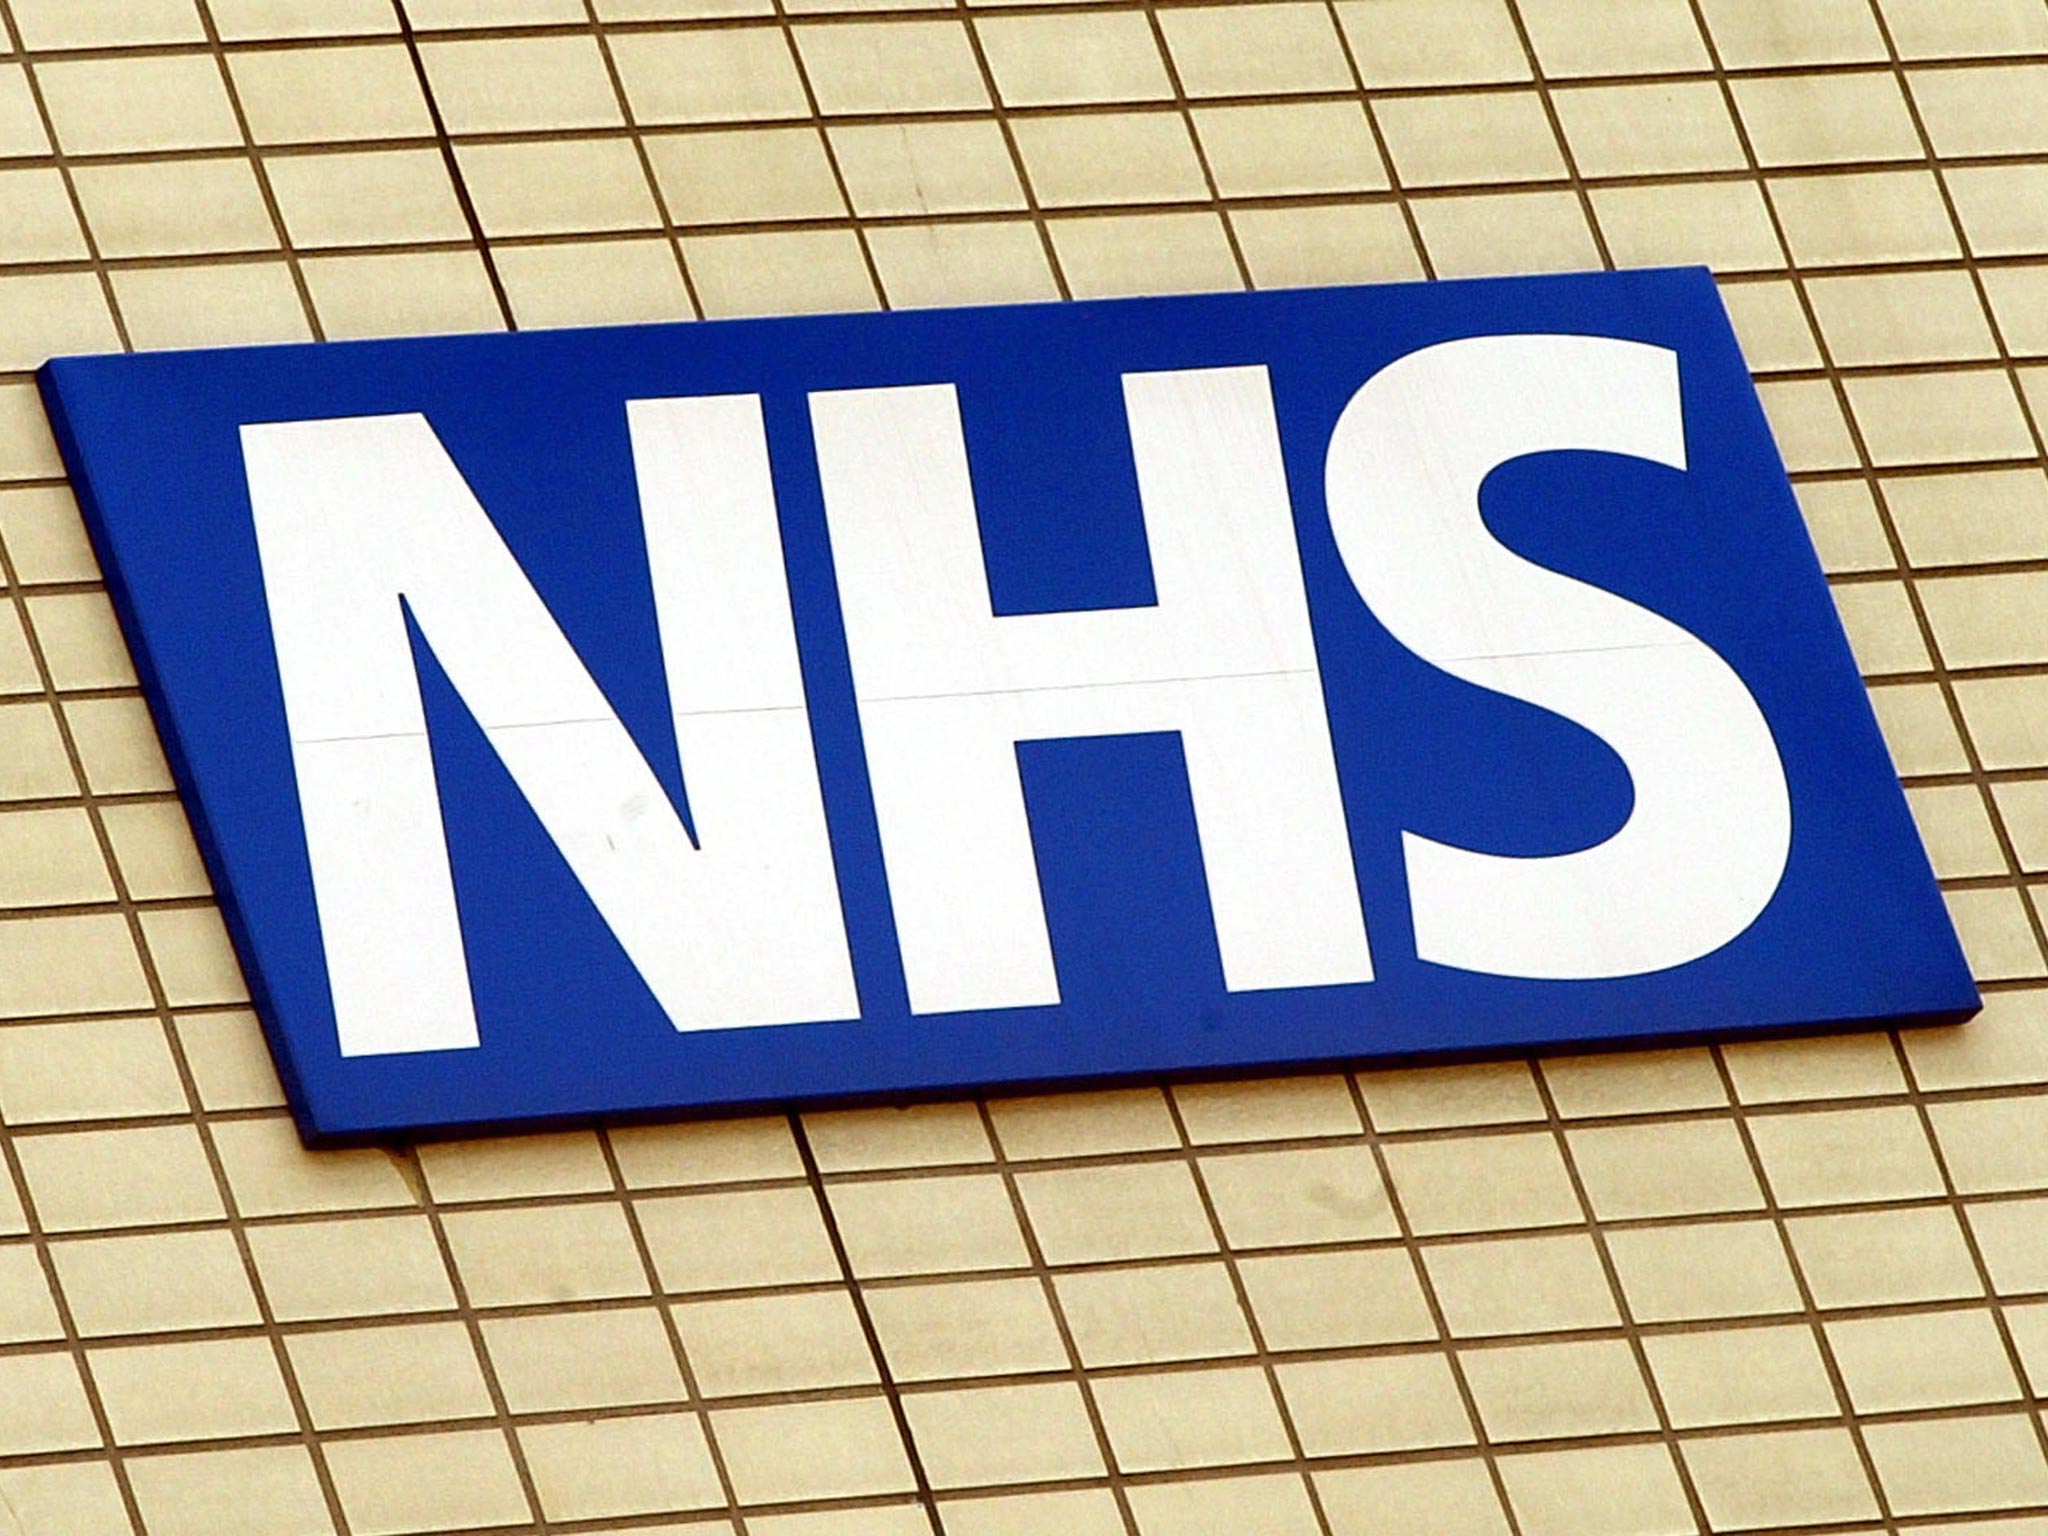 By 2020 an additional £30 billion will be needed to keep the NHS running at the current level of service provision